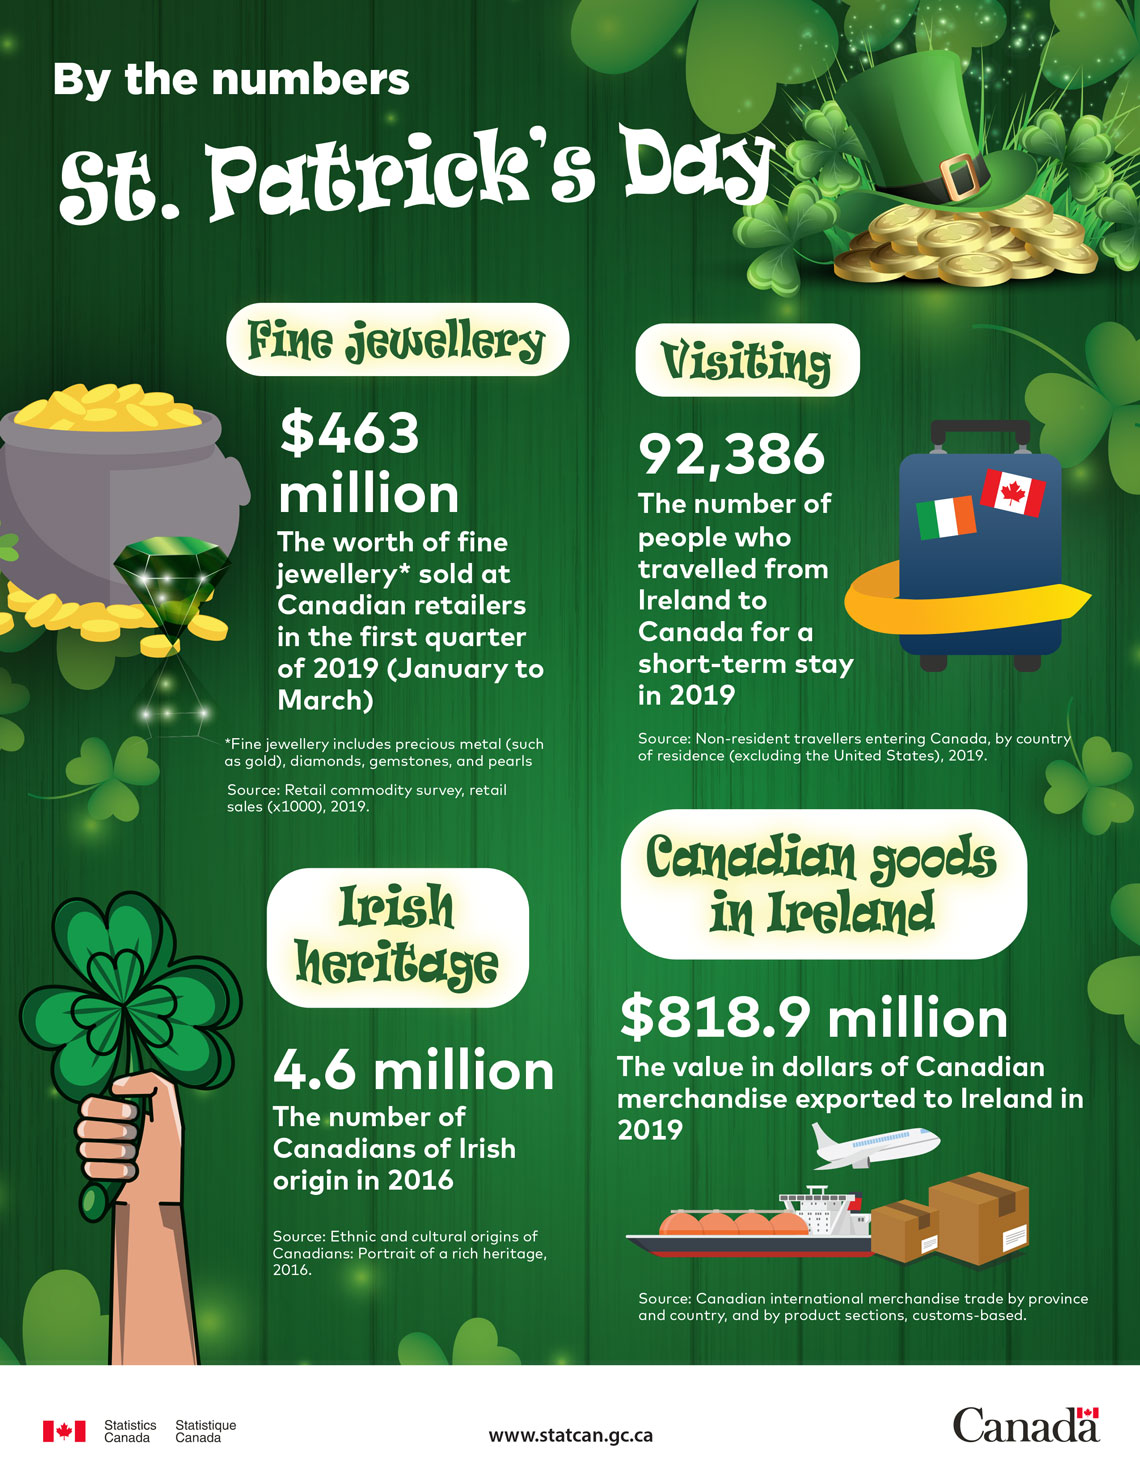 By the numbers: St. Patrick's Day